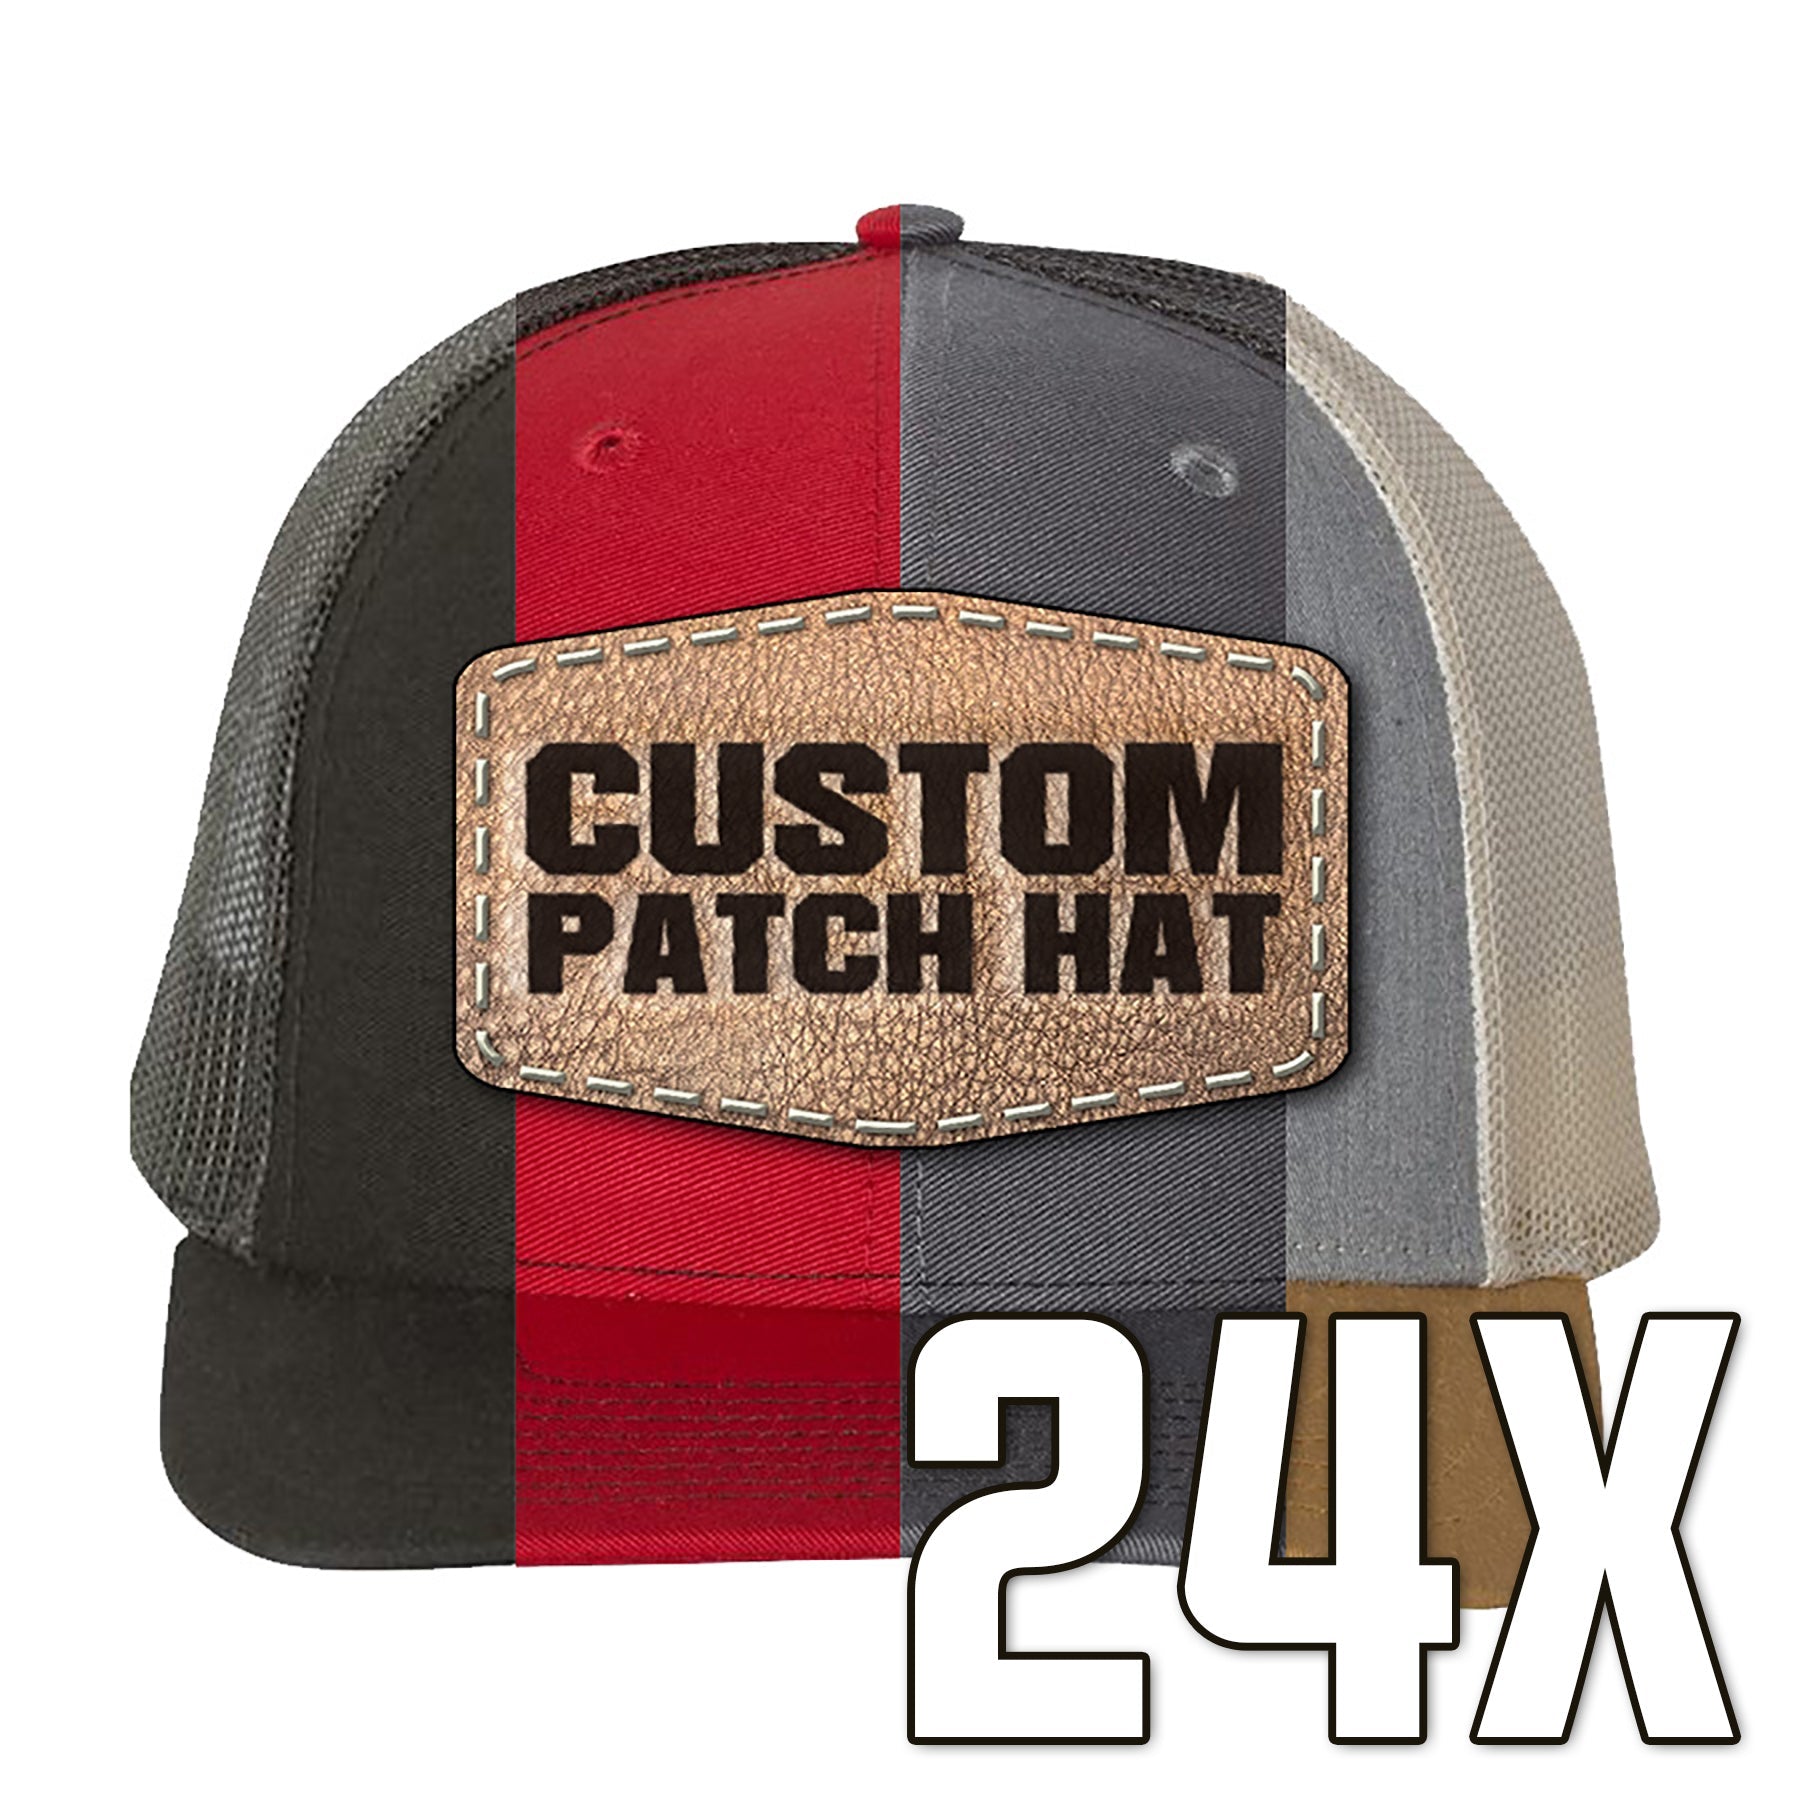 Bulk or Single - Custom Leather Patch Hat 24 Pack of Hats / Choc Chip/Grey Brown